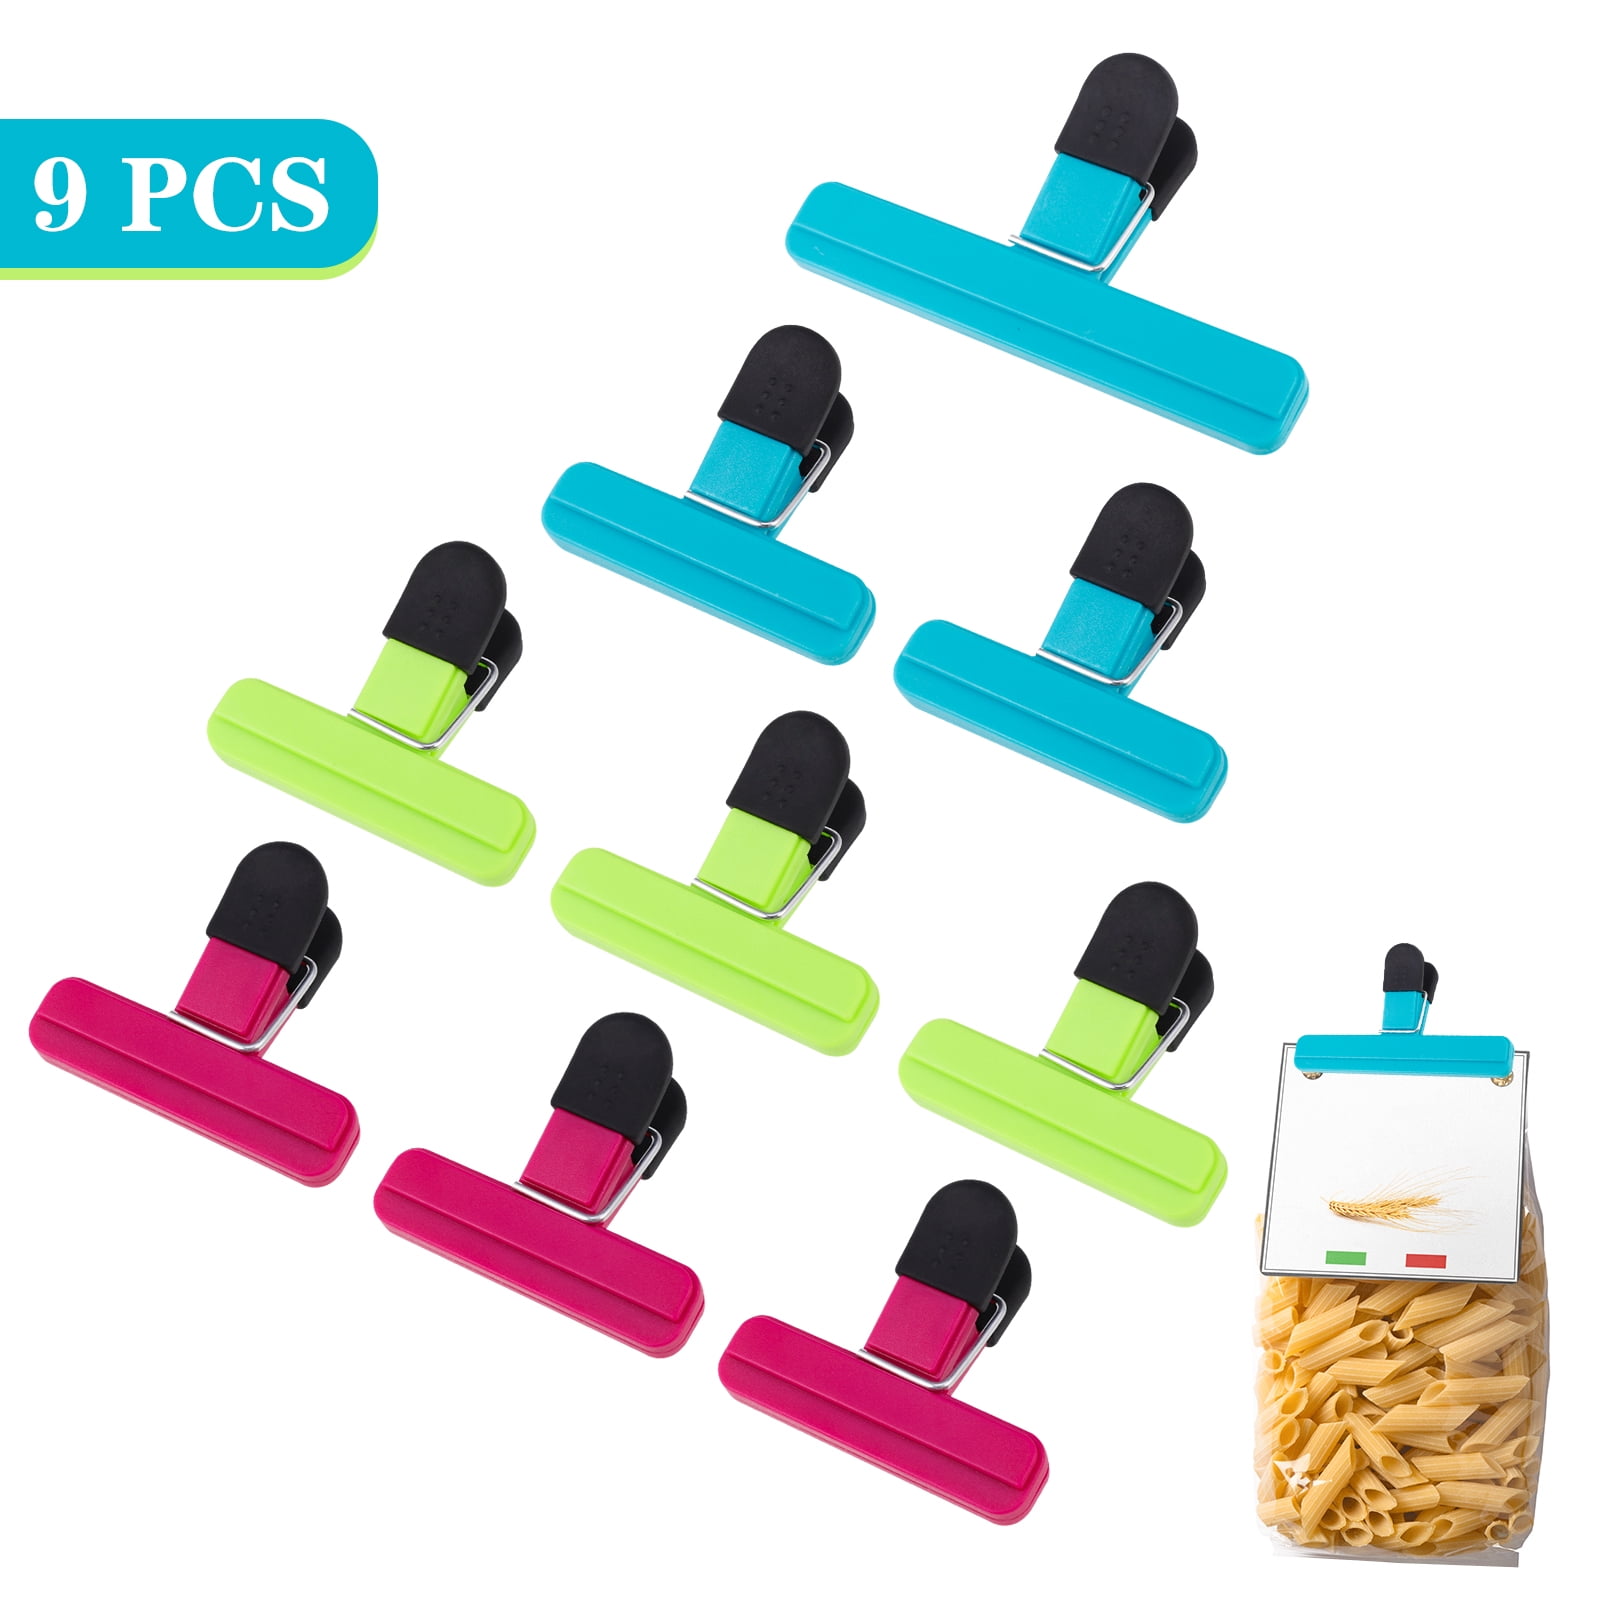 Pack of 12 Chip Bag Clips, SourceTonÂ Heavy Duty Food Clips (6